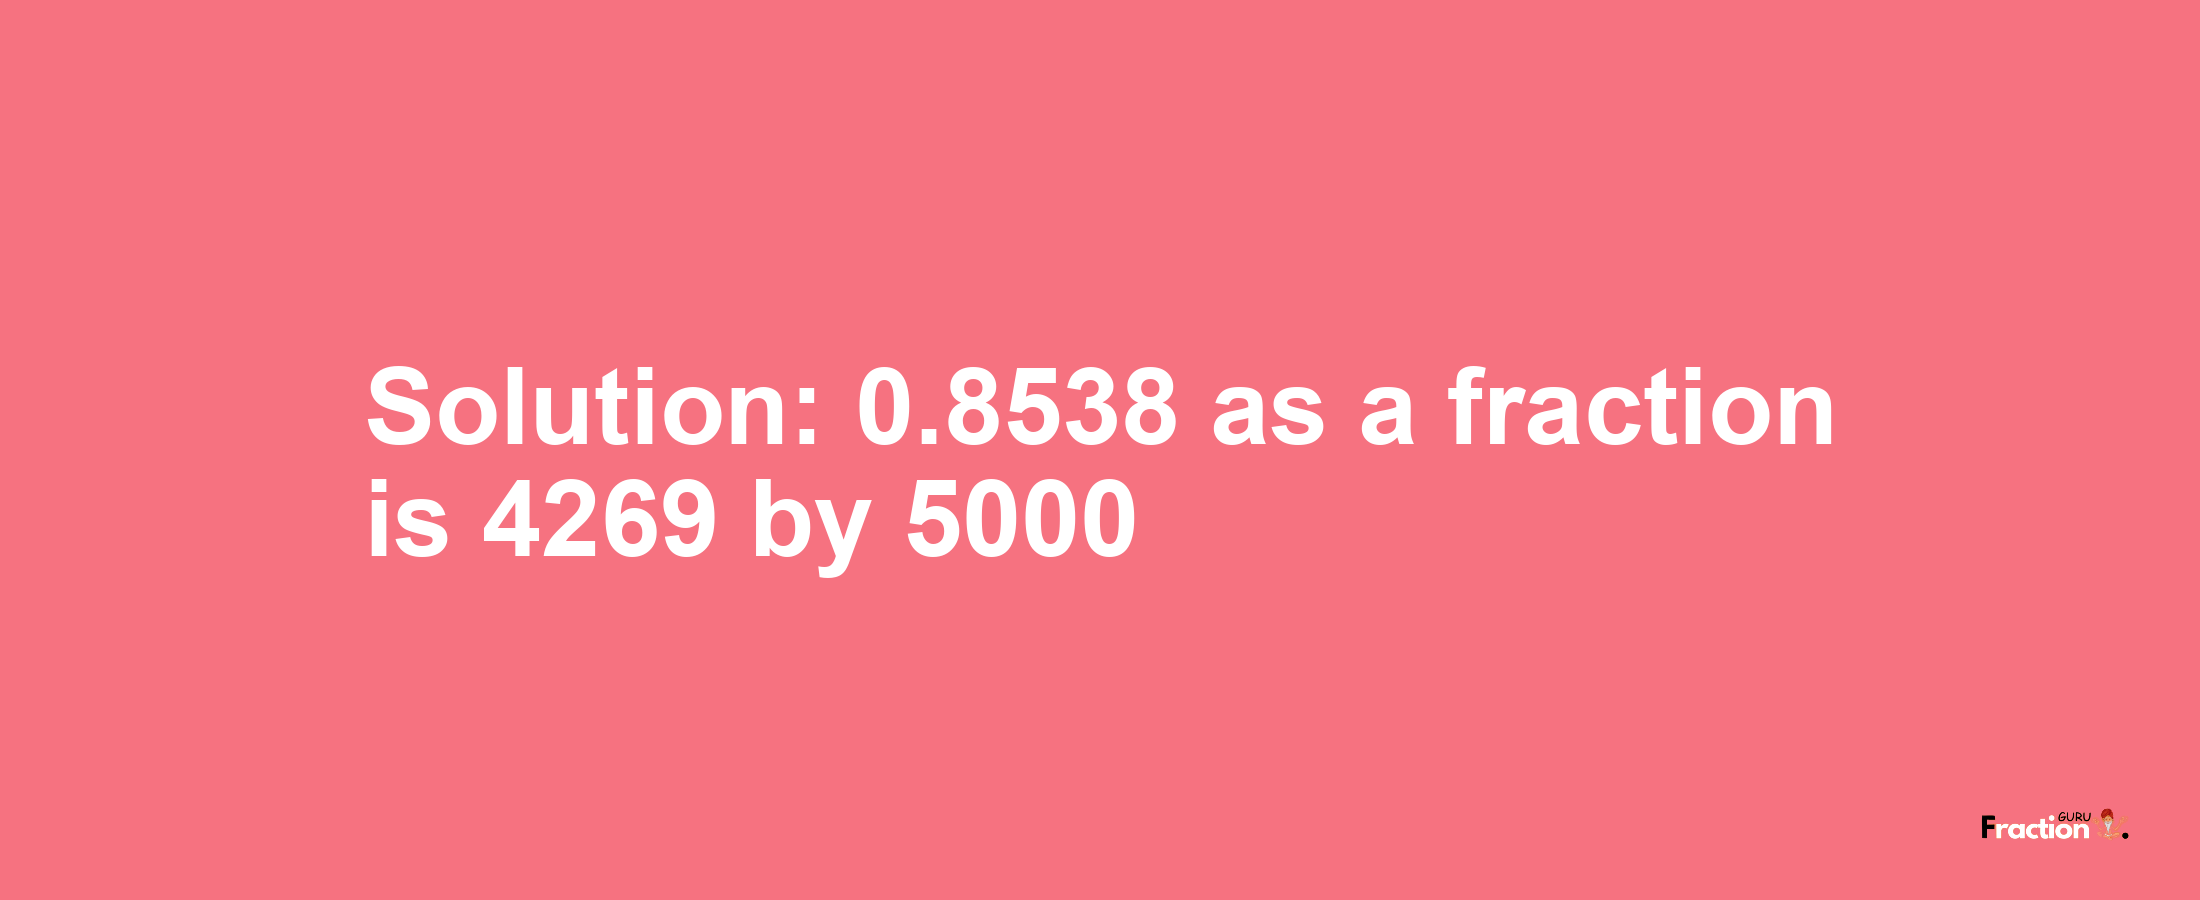 Solution:0.8538 as a fraction is 4269/5000